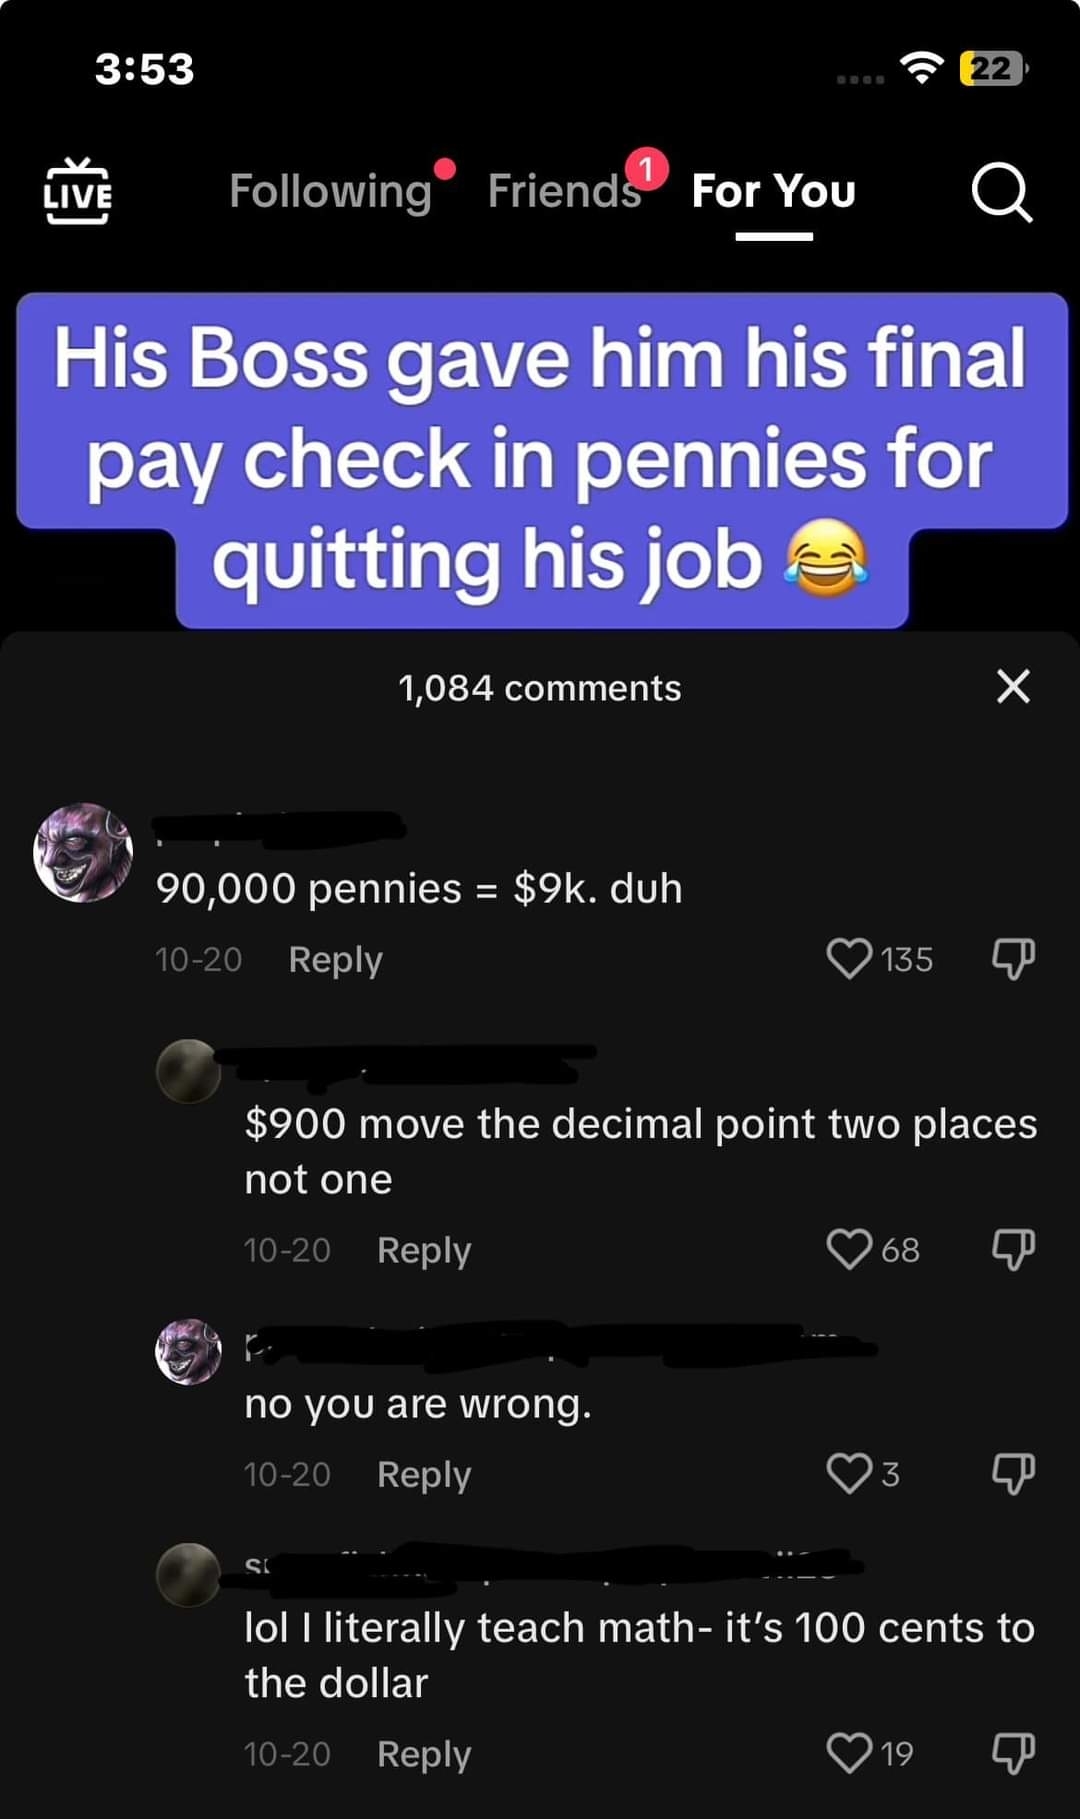 Boss gave employee his final paycheck in pennies for quitting, and someone says &quot;90,000 pennies=$9K, duh,&quot; and someone says &quot;$900; move the decimal point too places, not one,&quot; and they say &quot;No, you are wrong&quot;